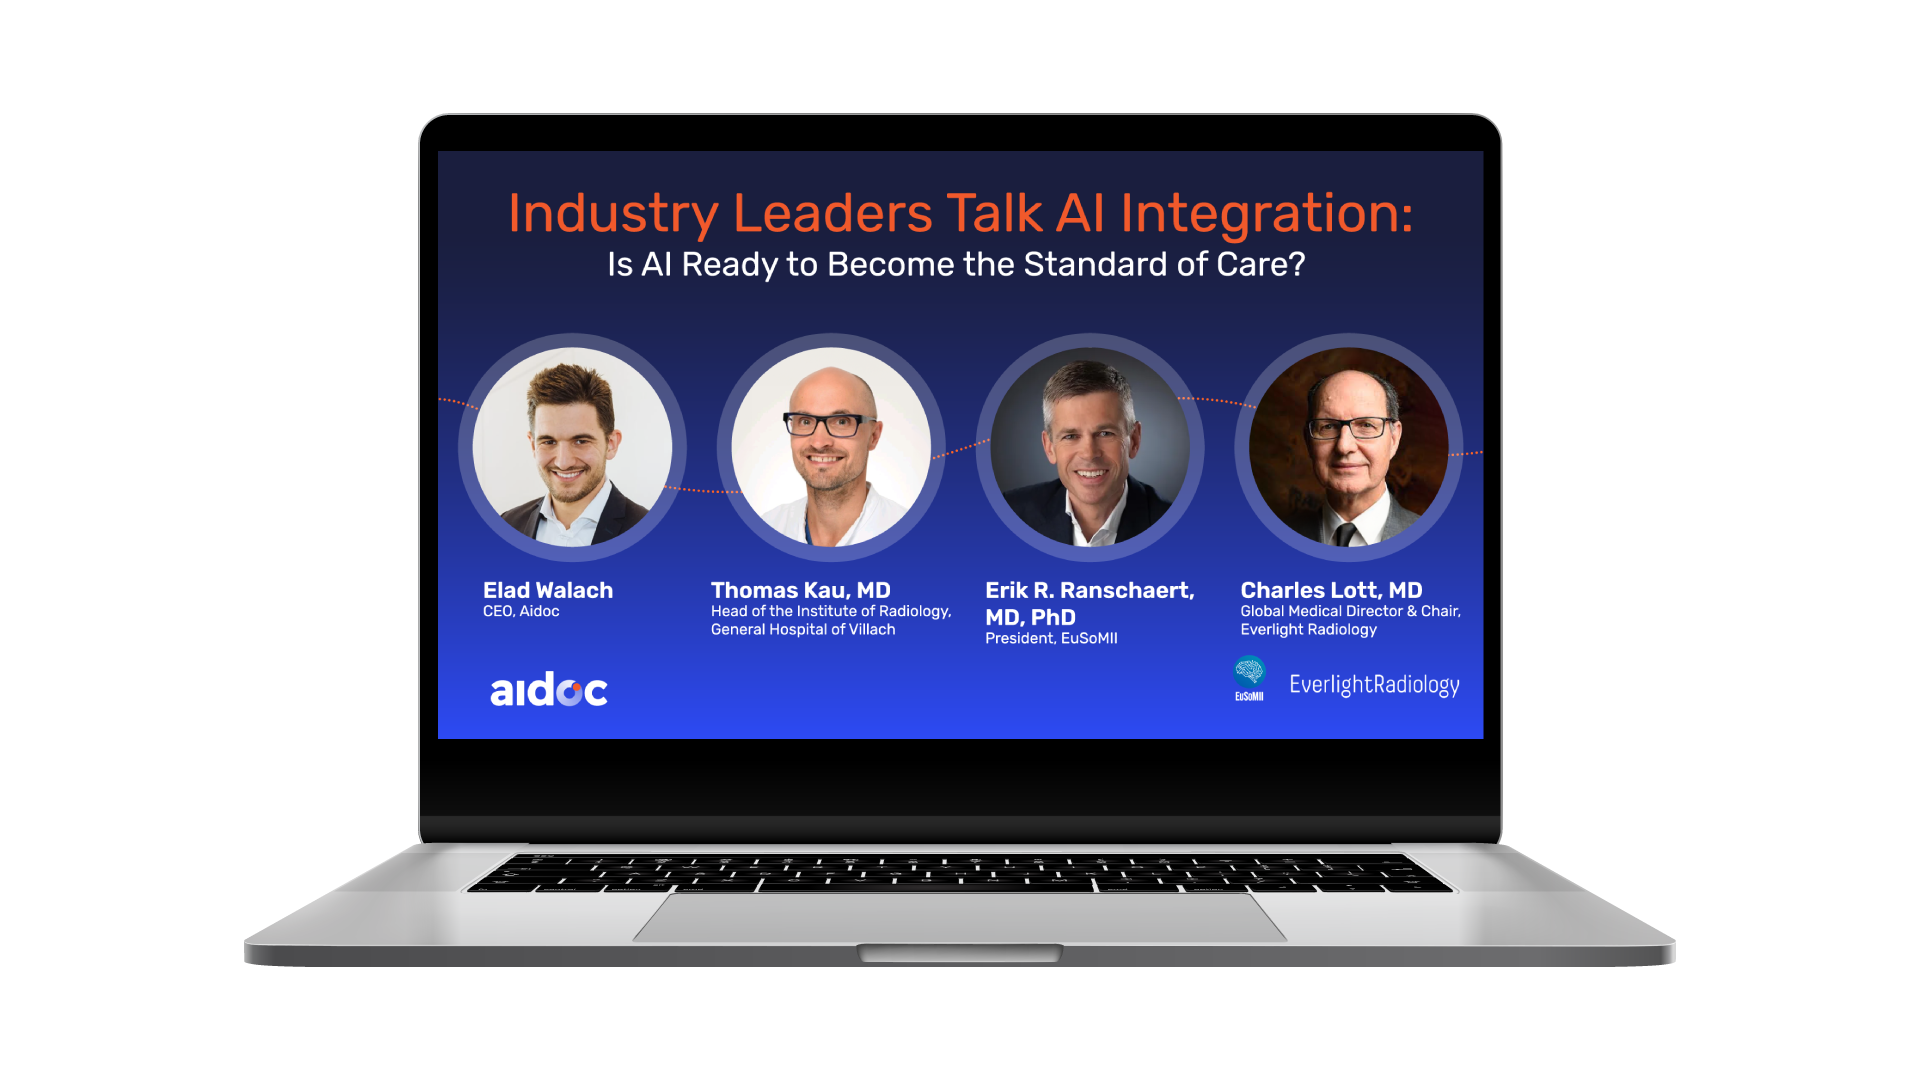 IQ Reseller enables ITADs achieve growth, better customer service, Podcast  - ASCDI